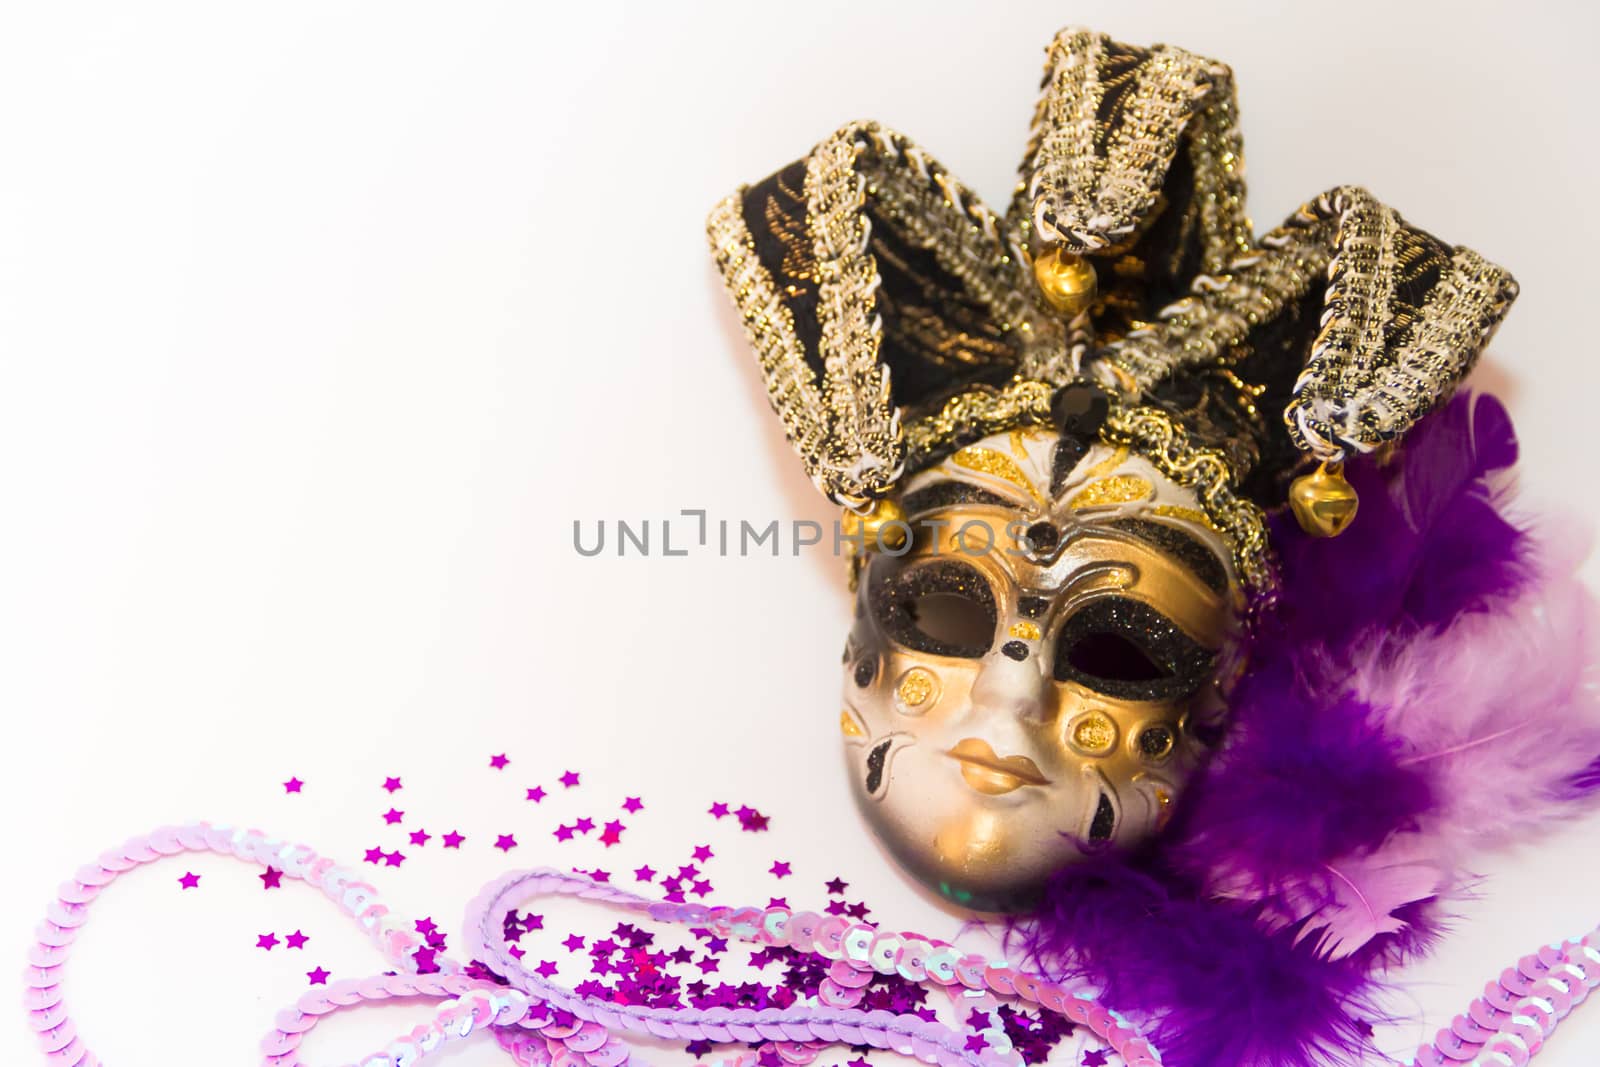 masks and feathers of venice carnival on white background by GabrielaBertolini